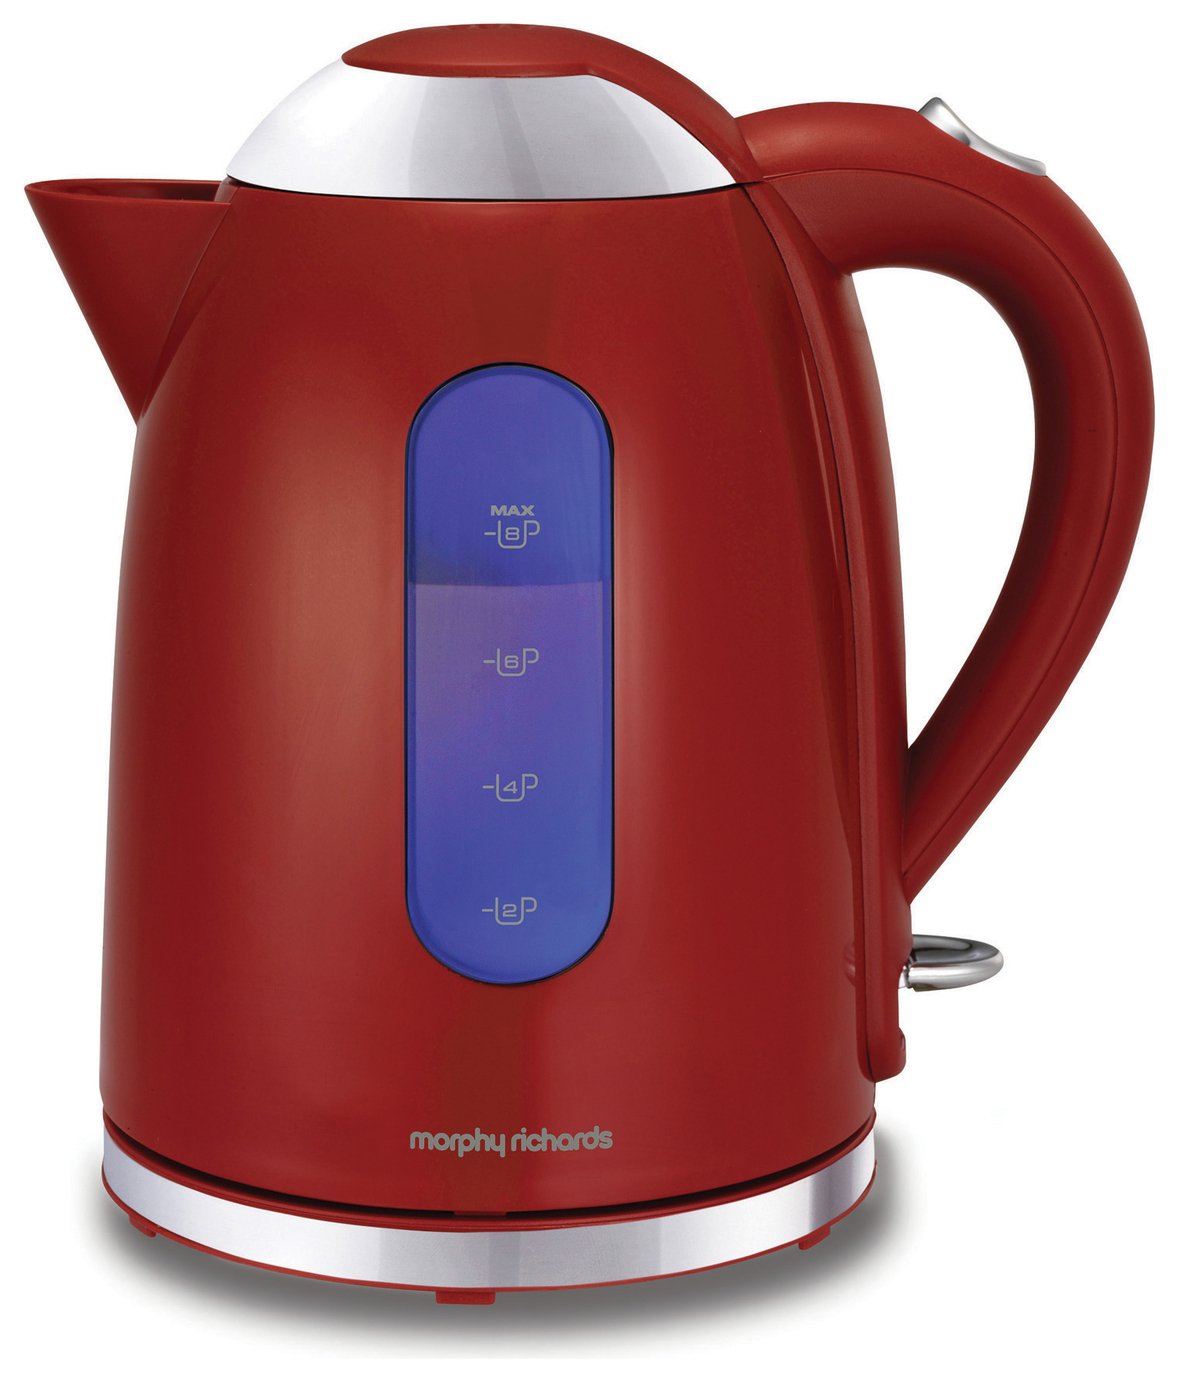 Morphy Richards 102504 Accents Dome Kettle - Red